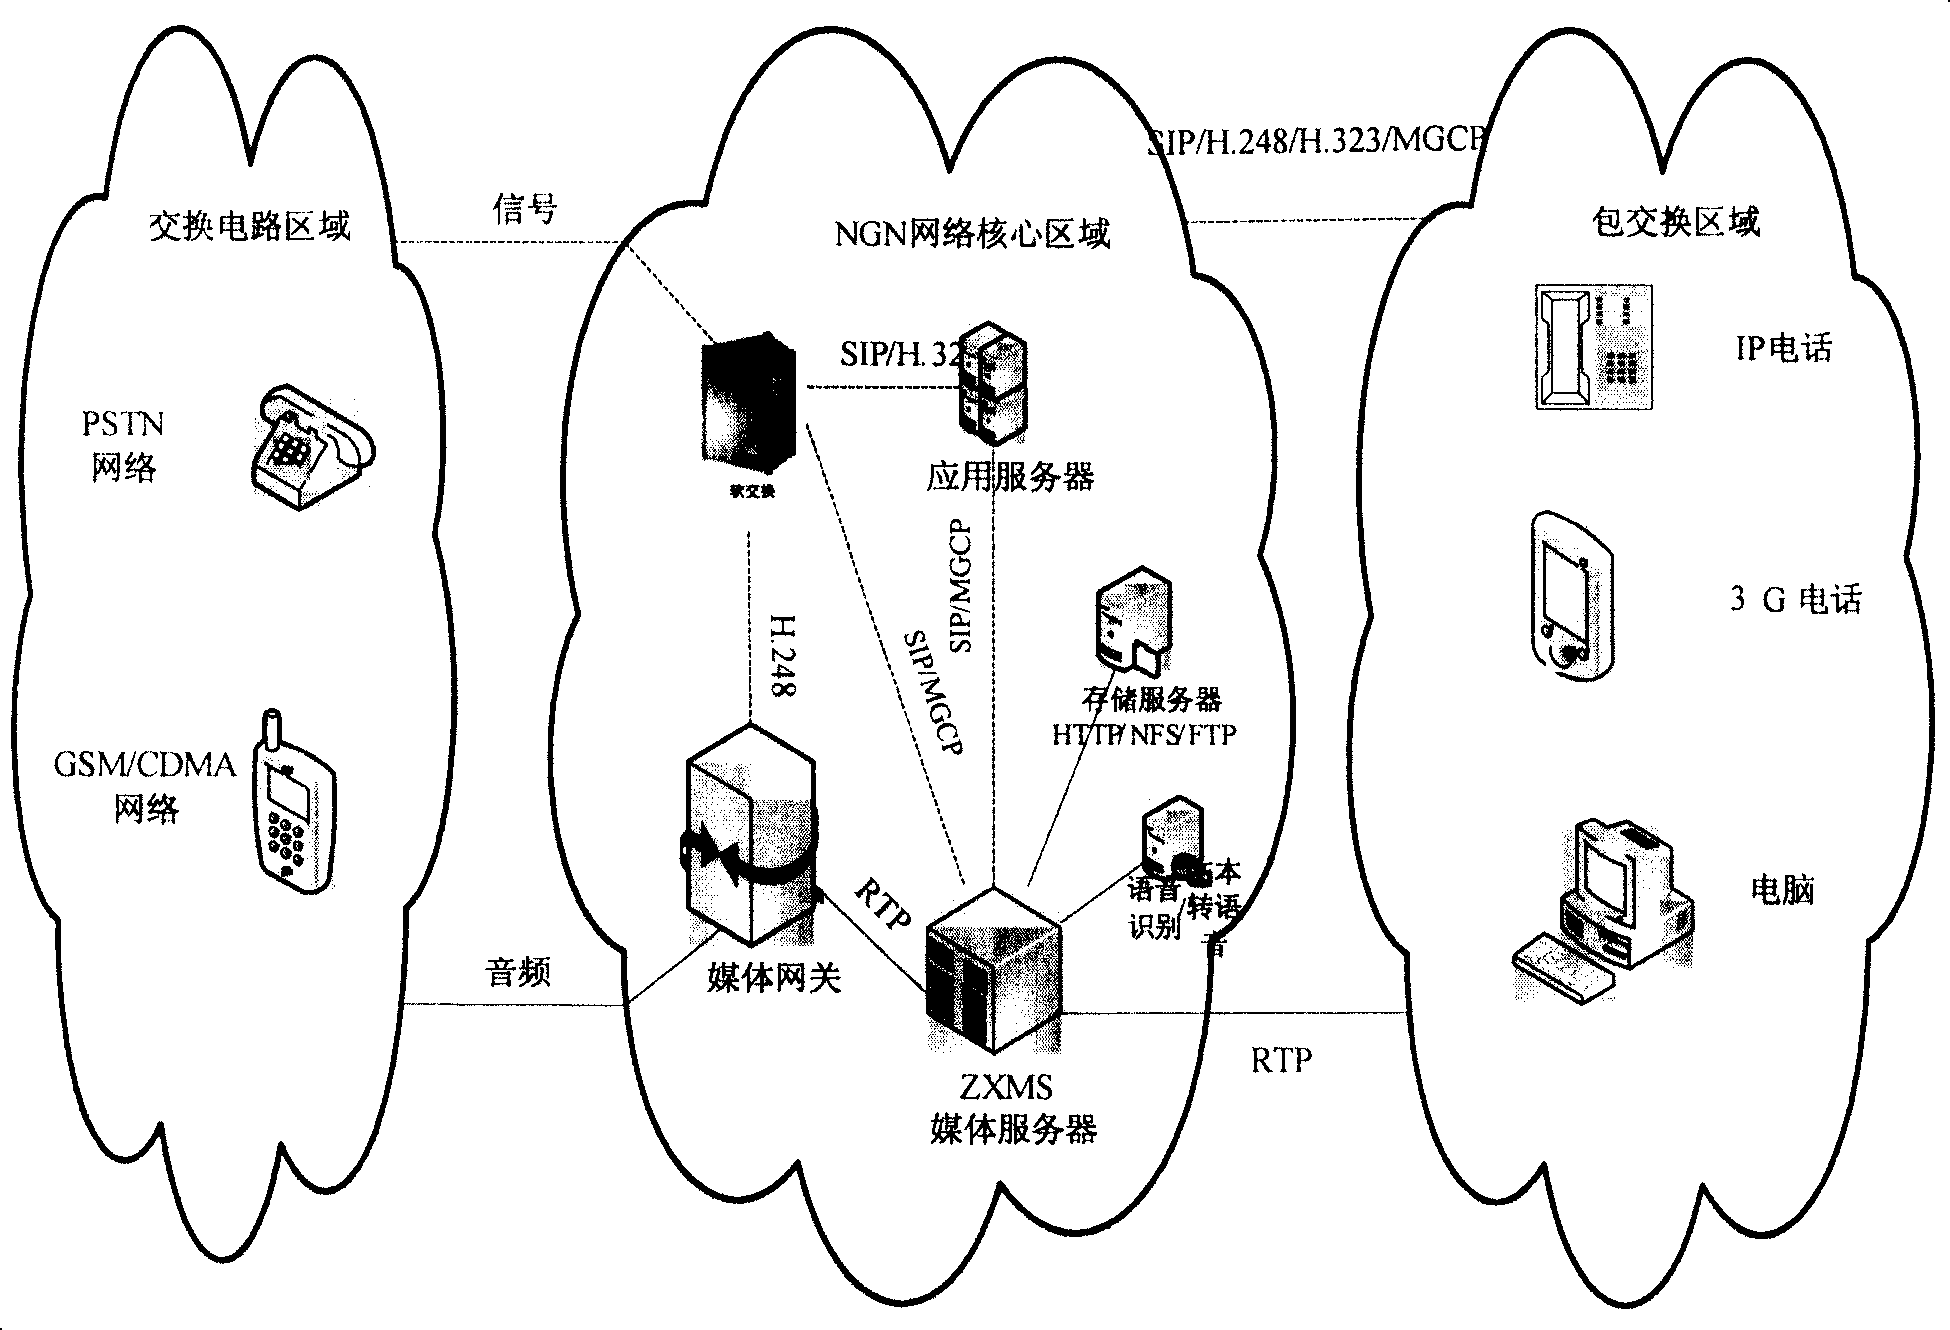 Device for transferring speech recognition to video